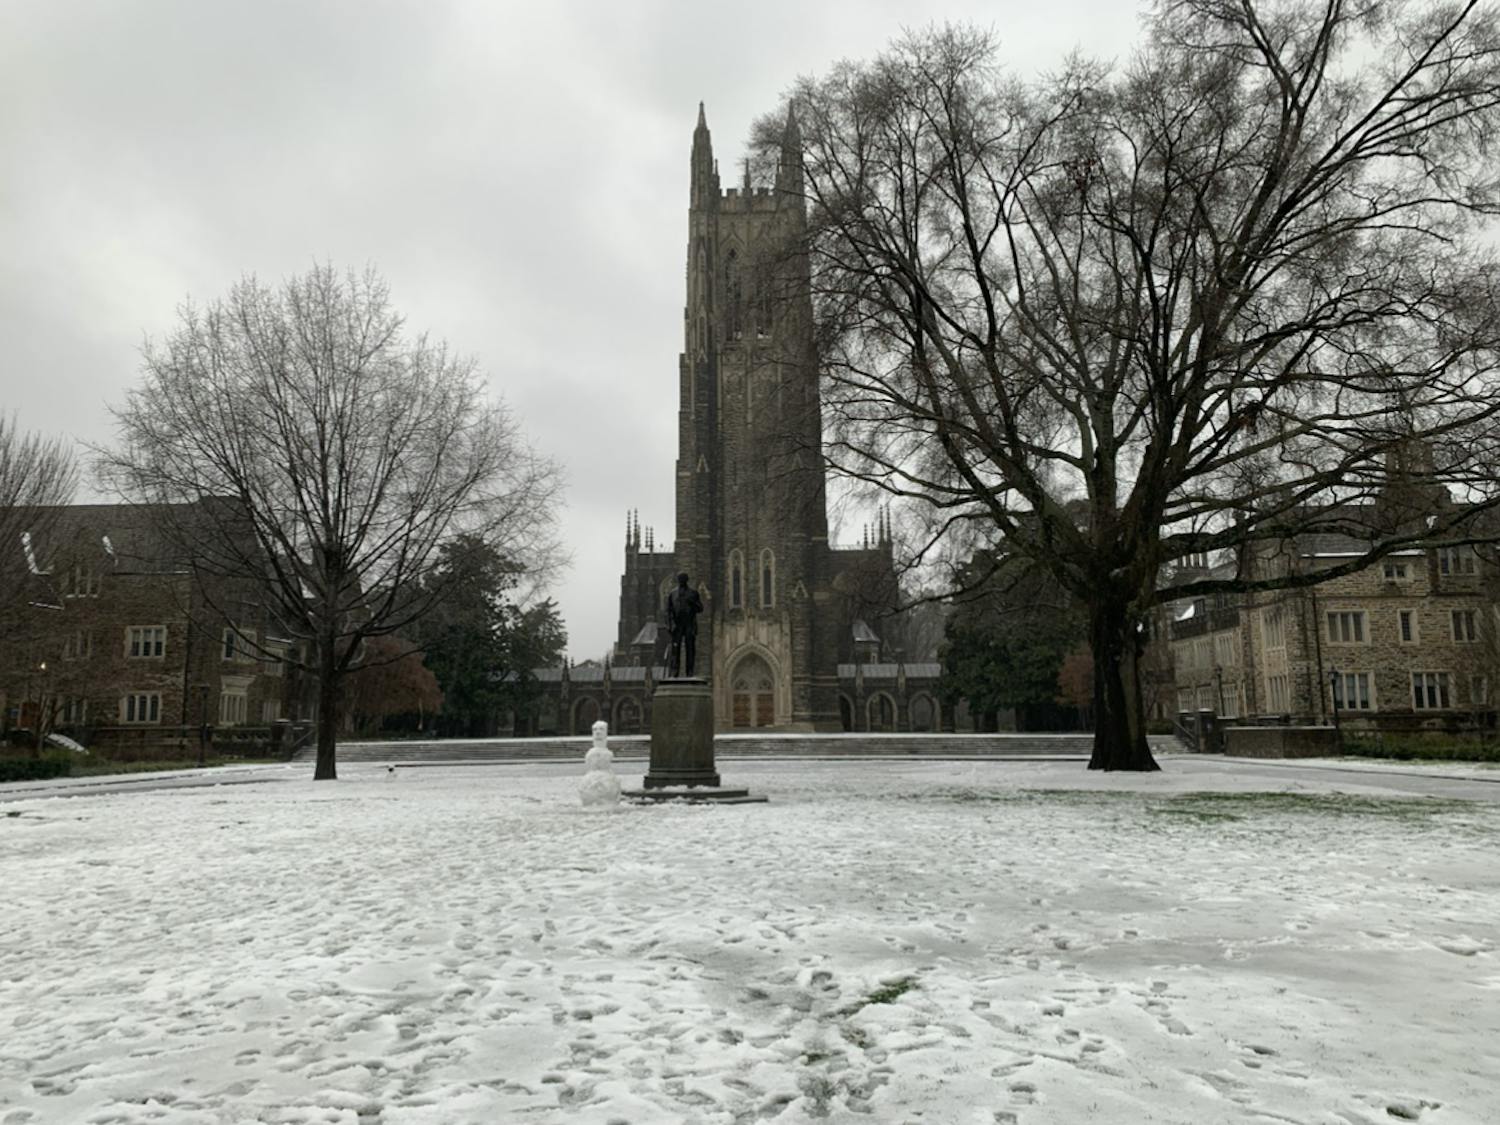 Duke saw its first snowfall of the year Sunday.